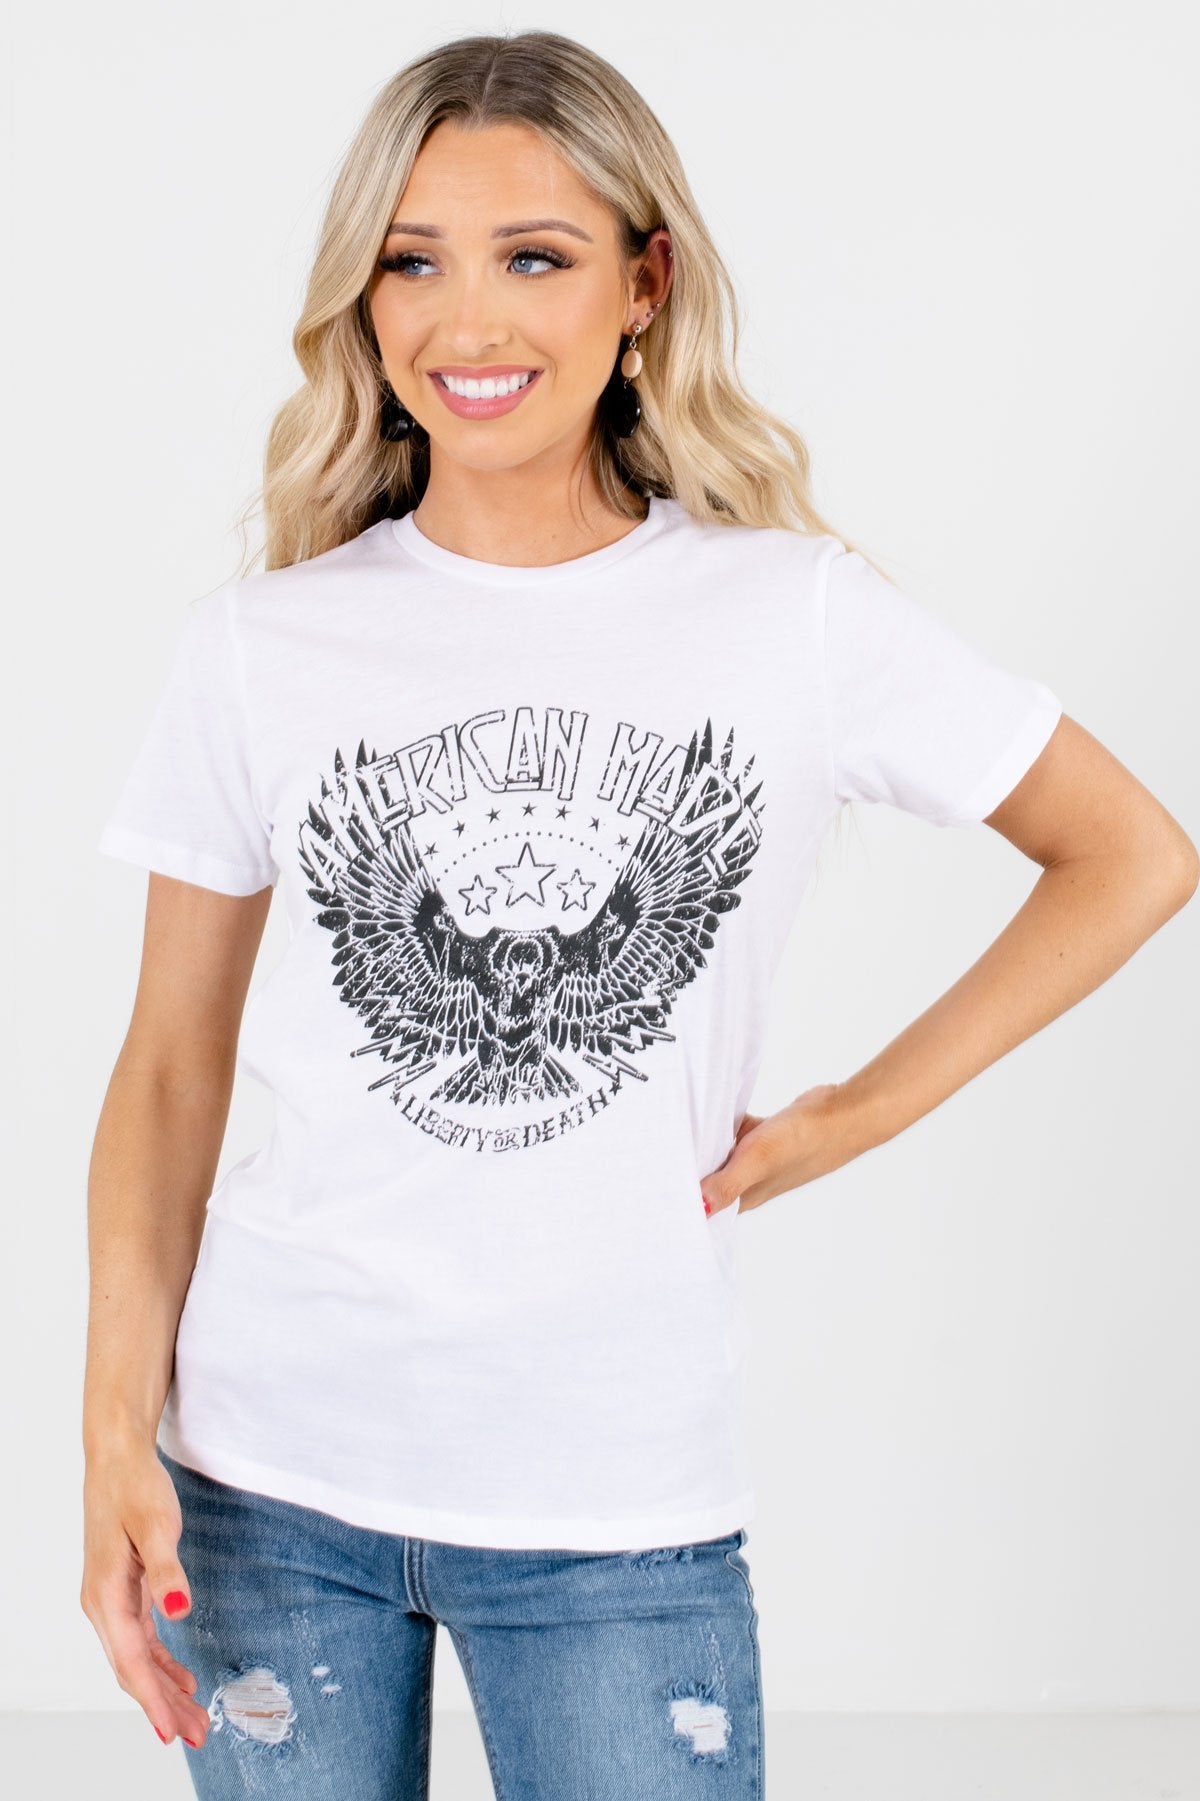 White "American Made" Lettering Boutique Graphic Tees for Women